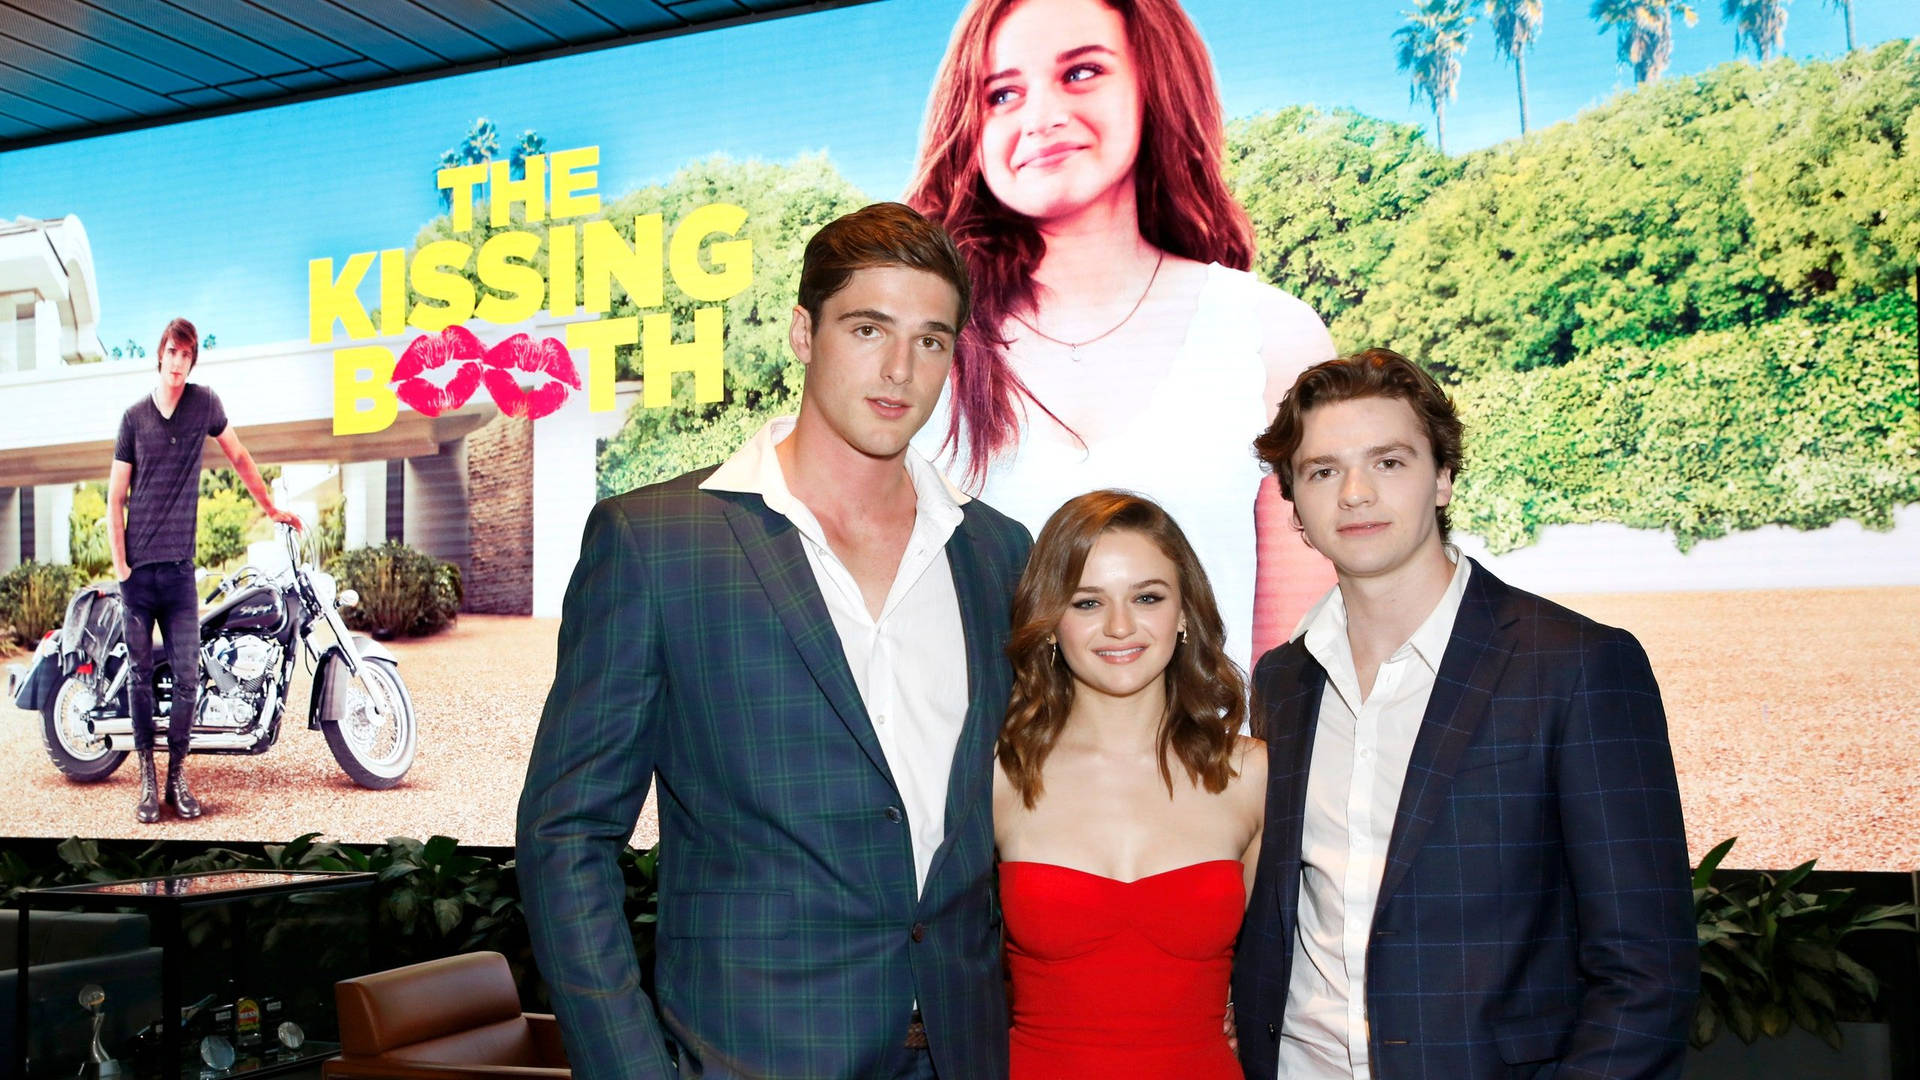 The Kissing Booth Screening Premiere Background